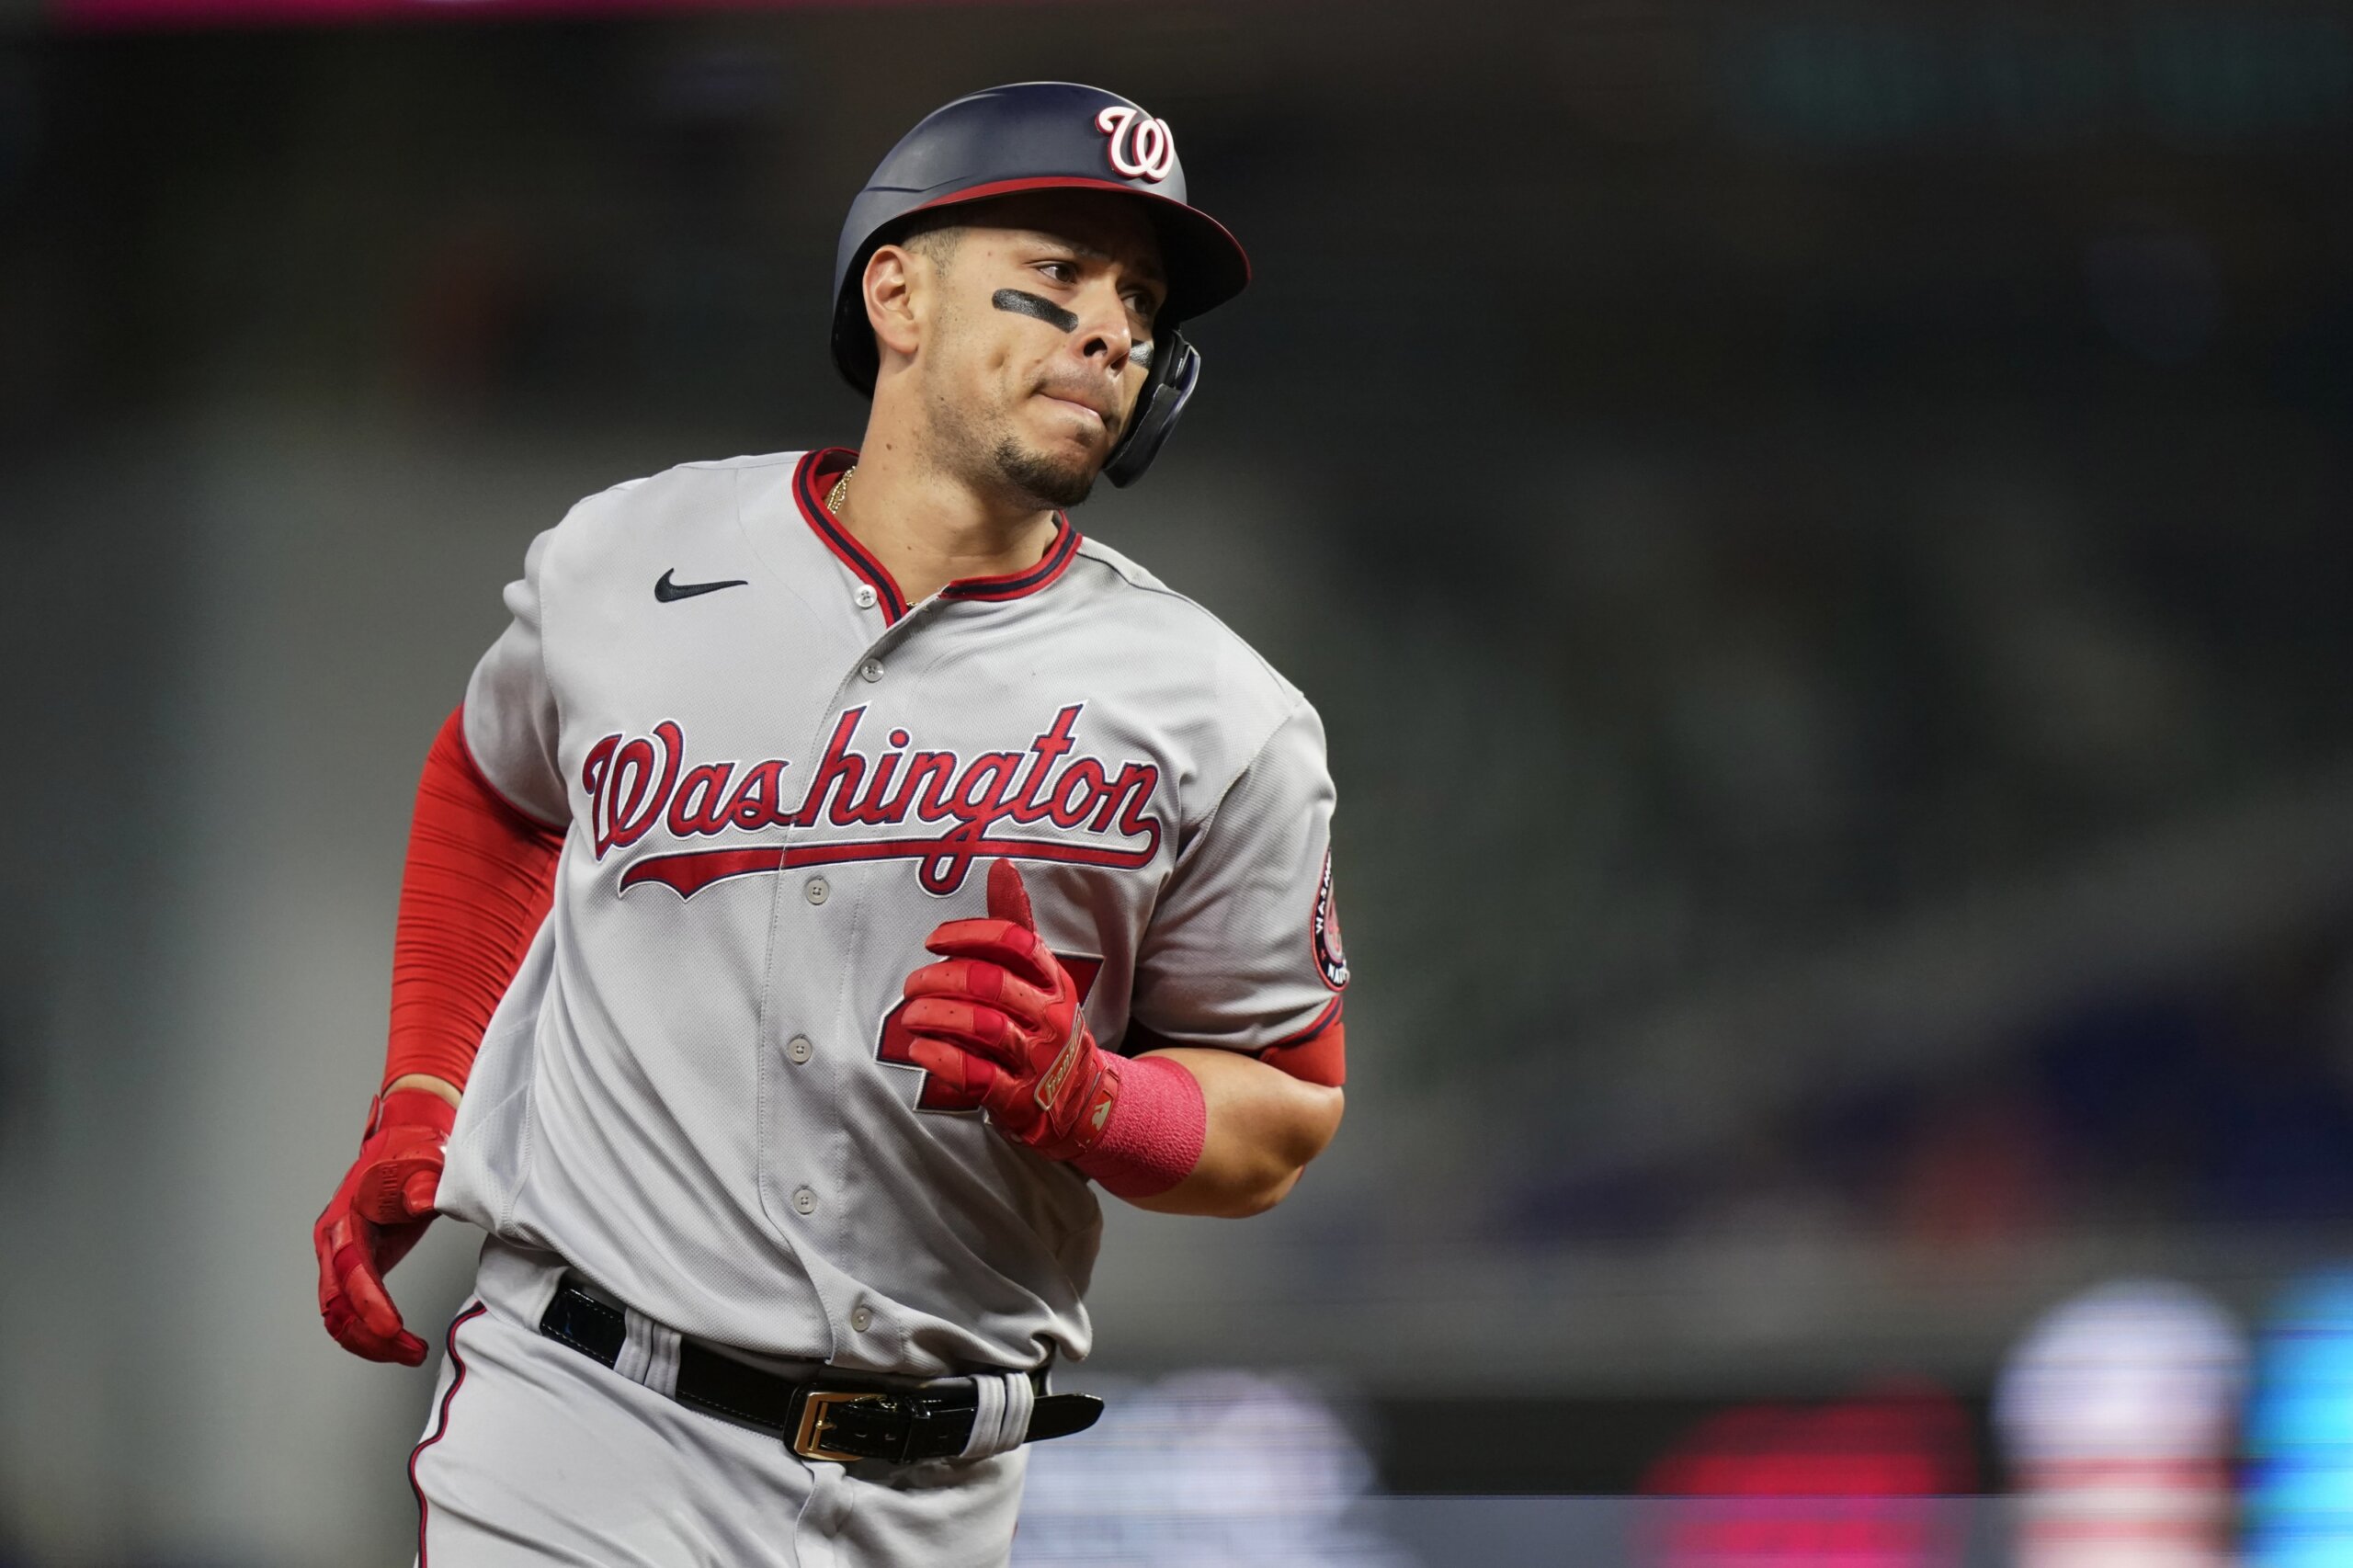 Nationals Notebook: Swept out of the season - WTOP News